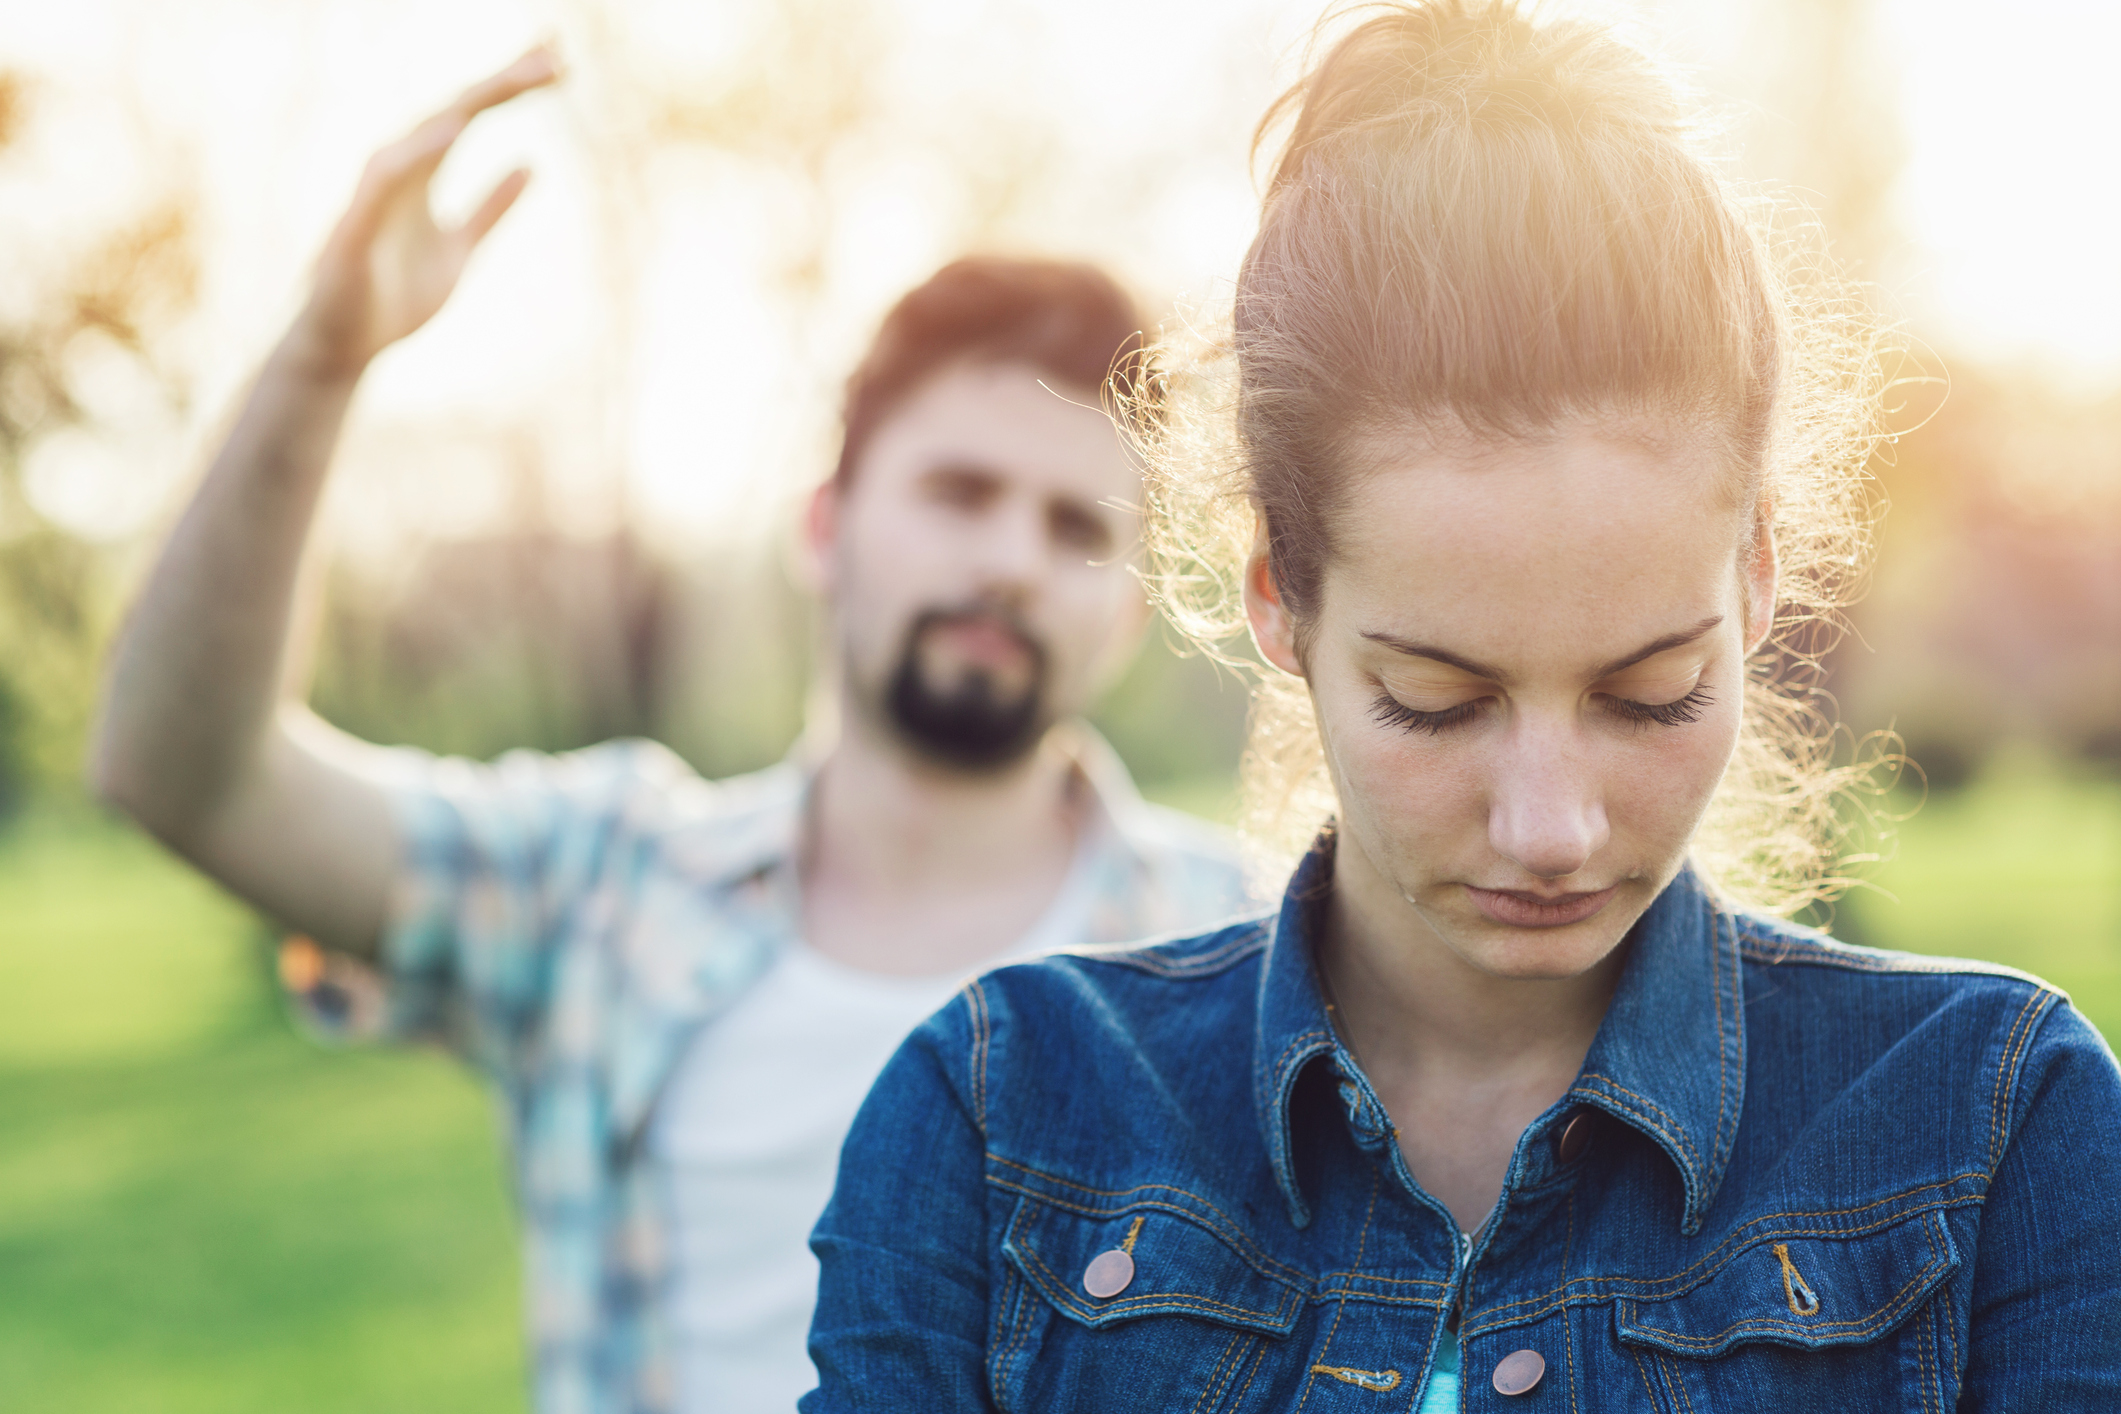 How Can I Lose My Anger Before I Lose My Fiancée?